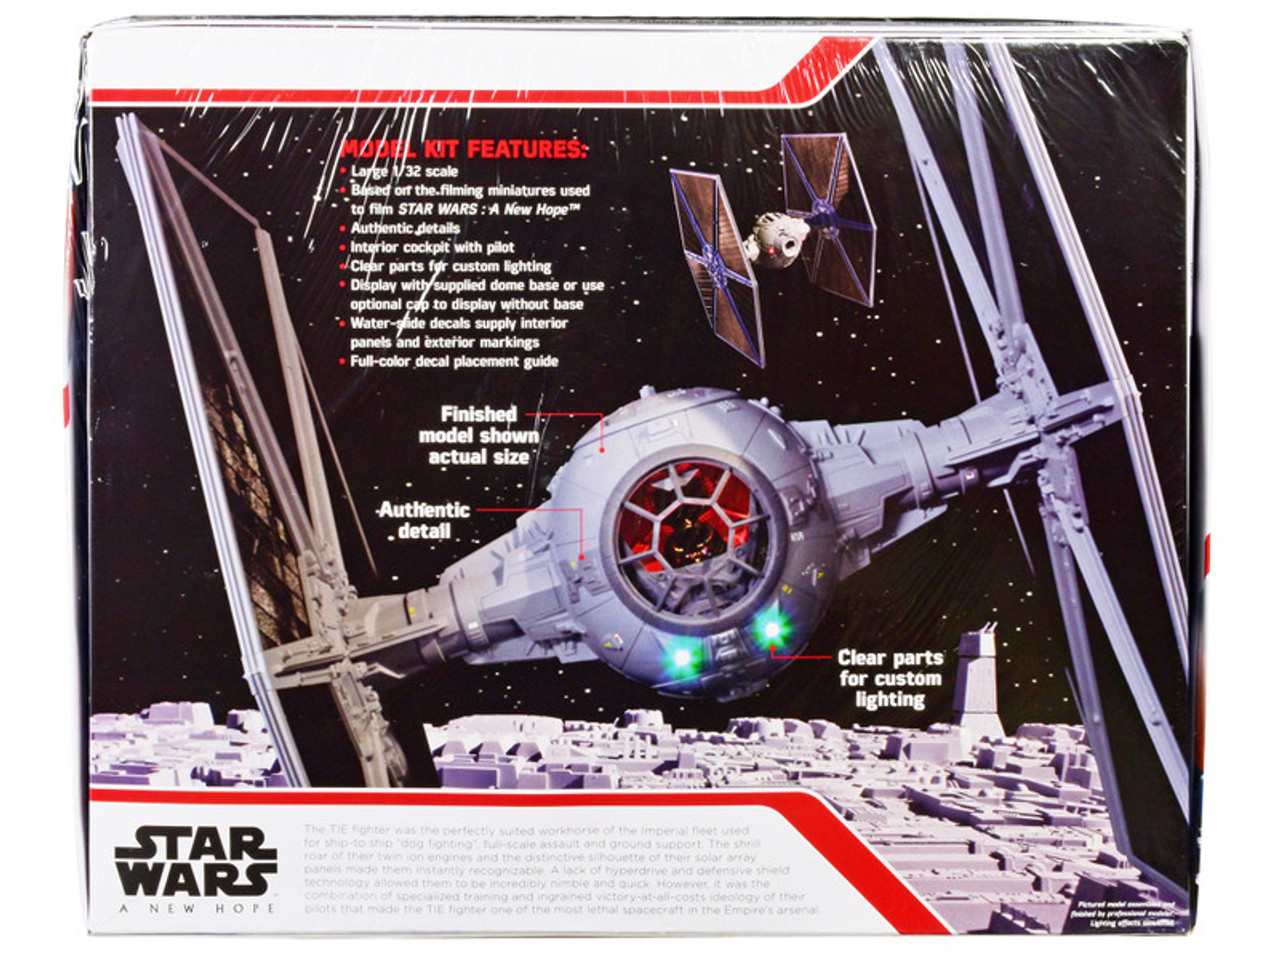 Skill 2 Model Kit Tie Fighter "Star Wars: Episode IV – A New Hope" (1977) Movie 1/32 Scale Model by AMT